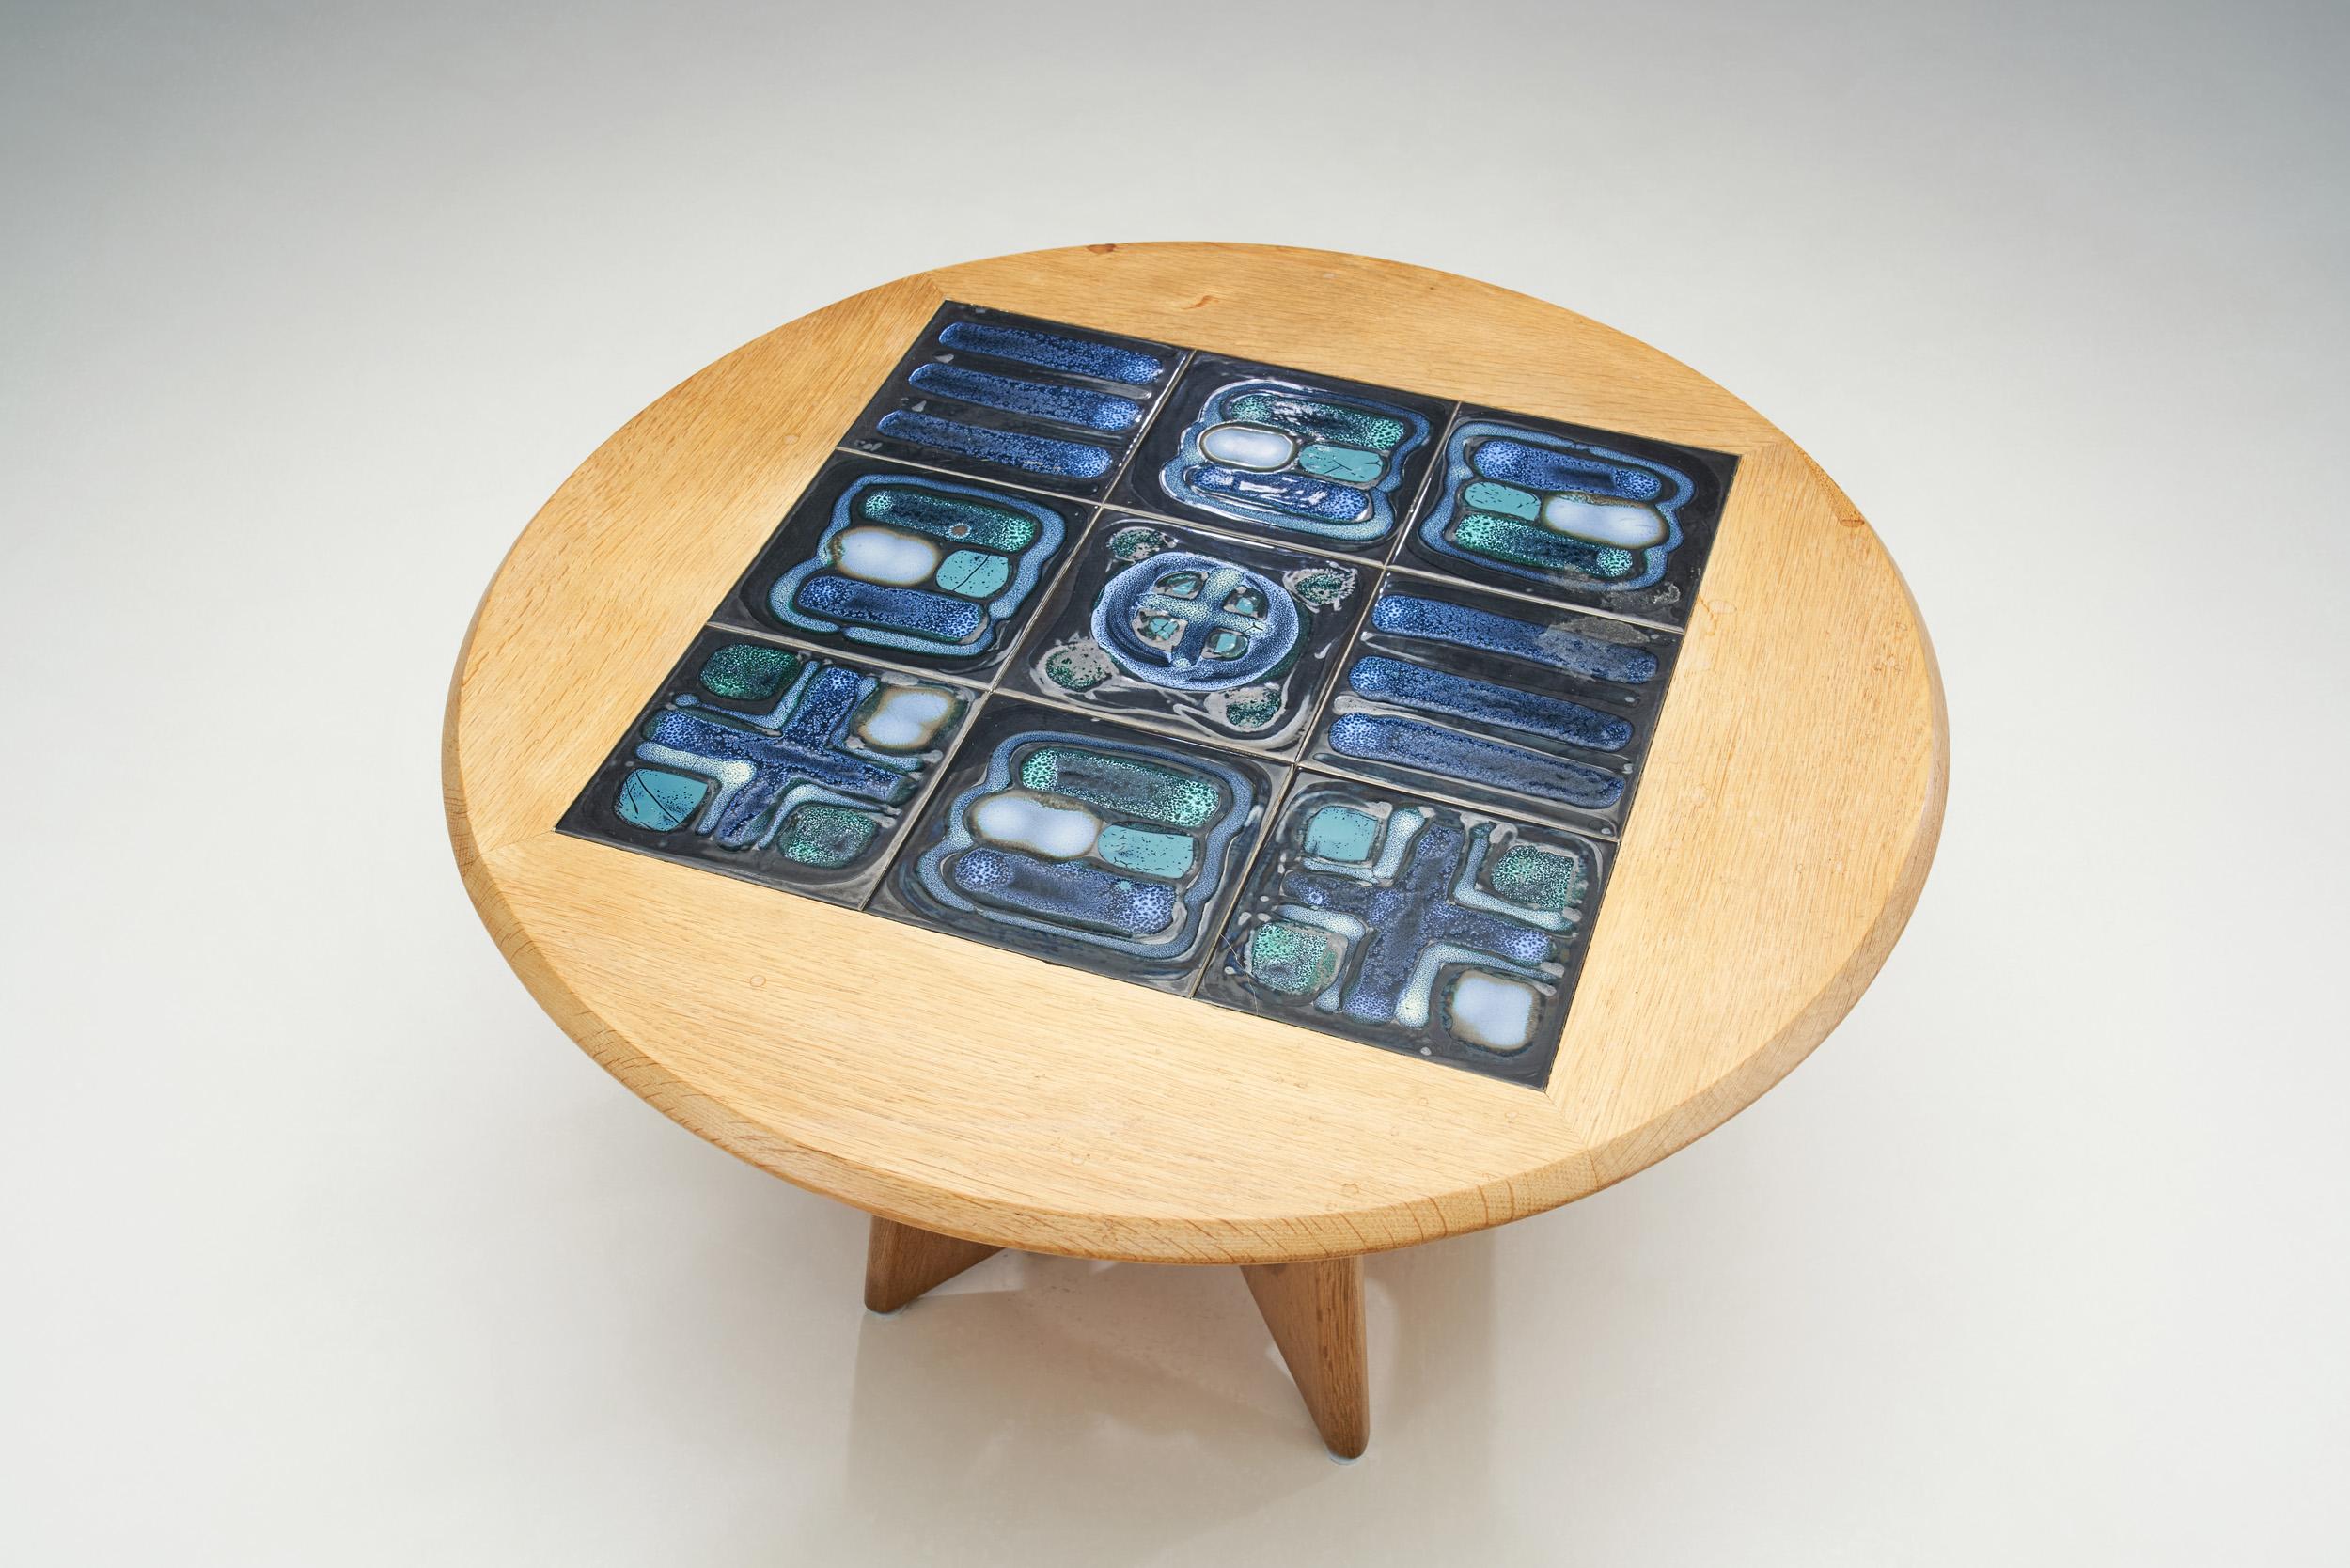 Mid-20th Century Guillerme et Chambron Coffee Table with Ceramic Inlays, France, 1960s For Sale